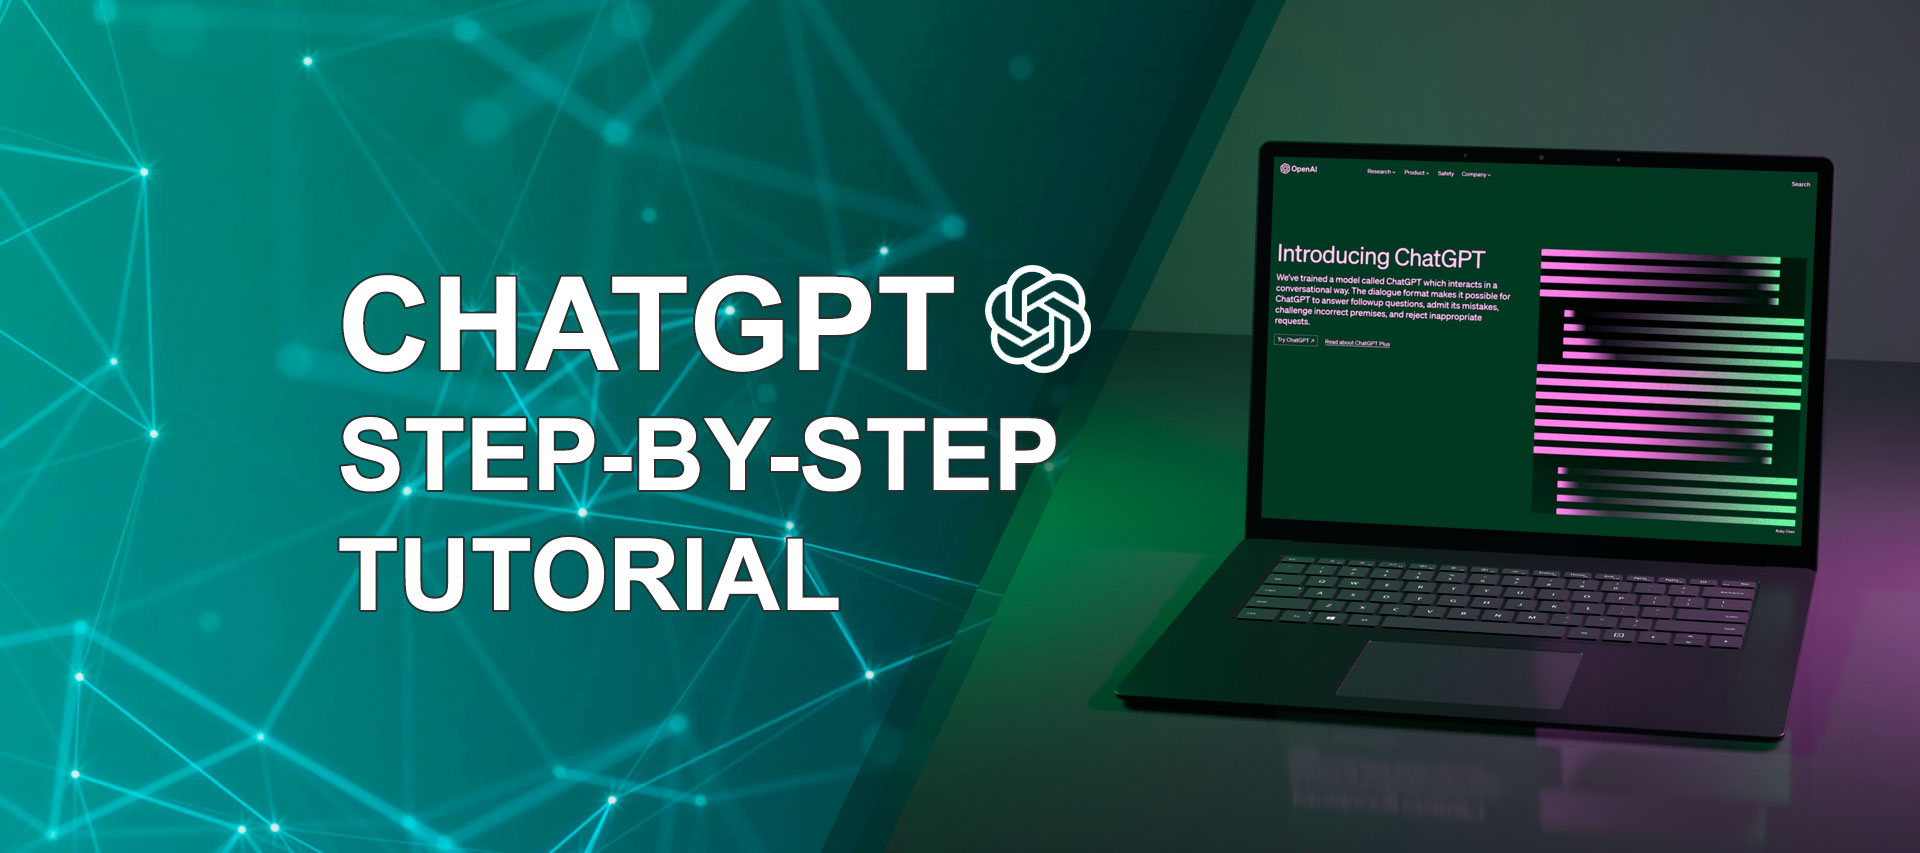 How To Use ChatGPT (Step-By-Step Tutorial)